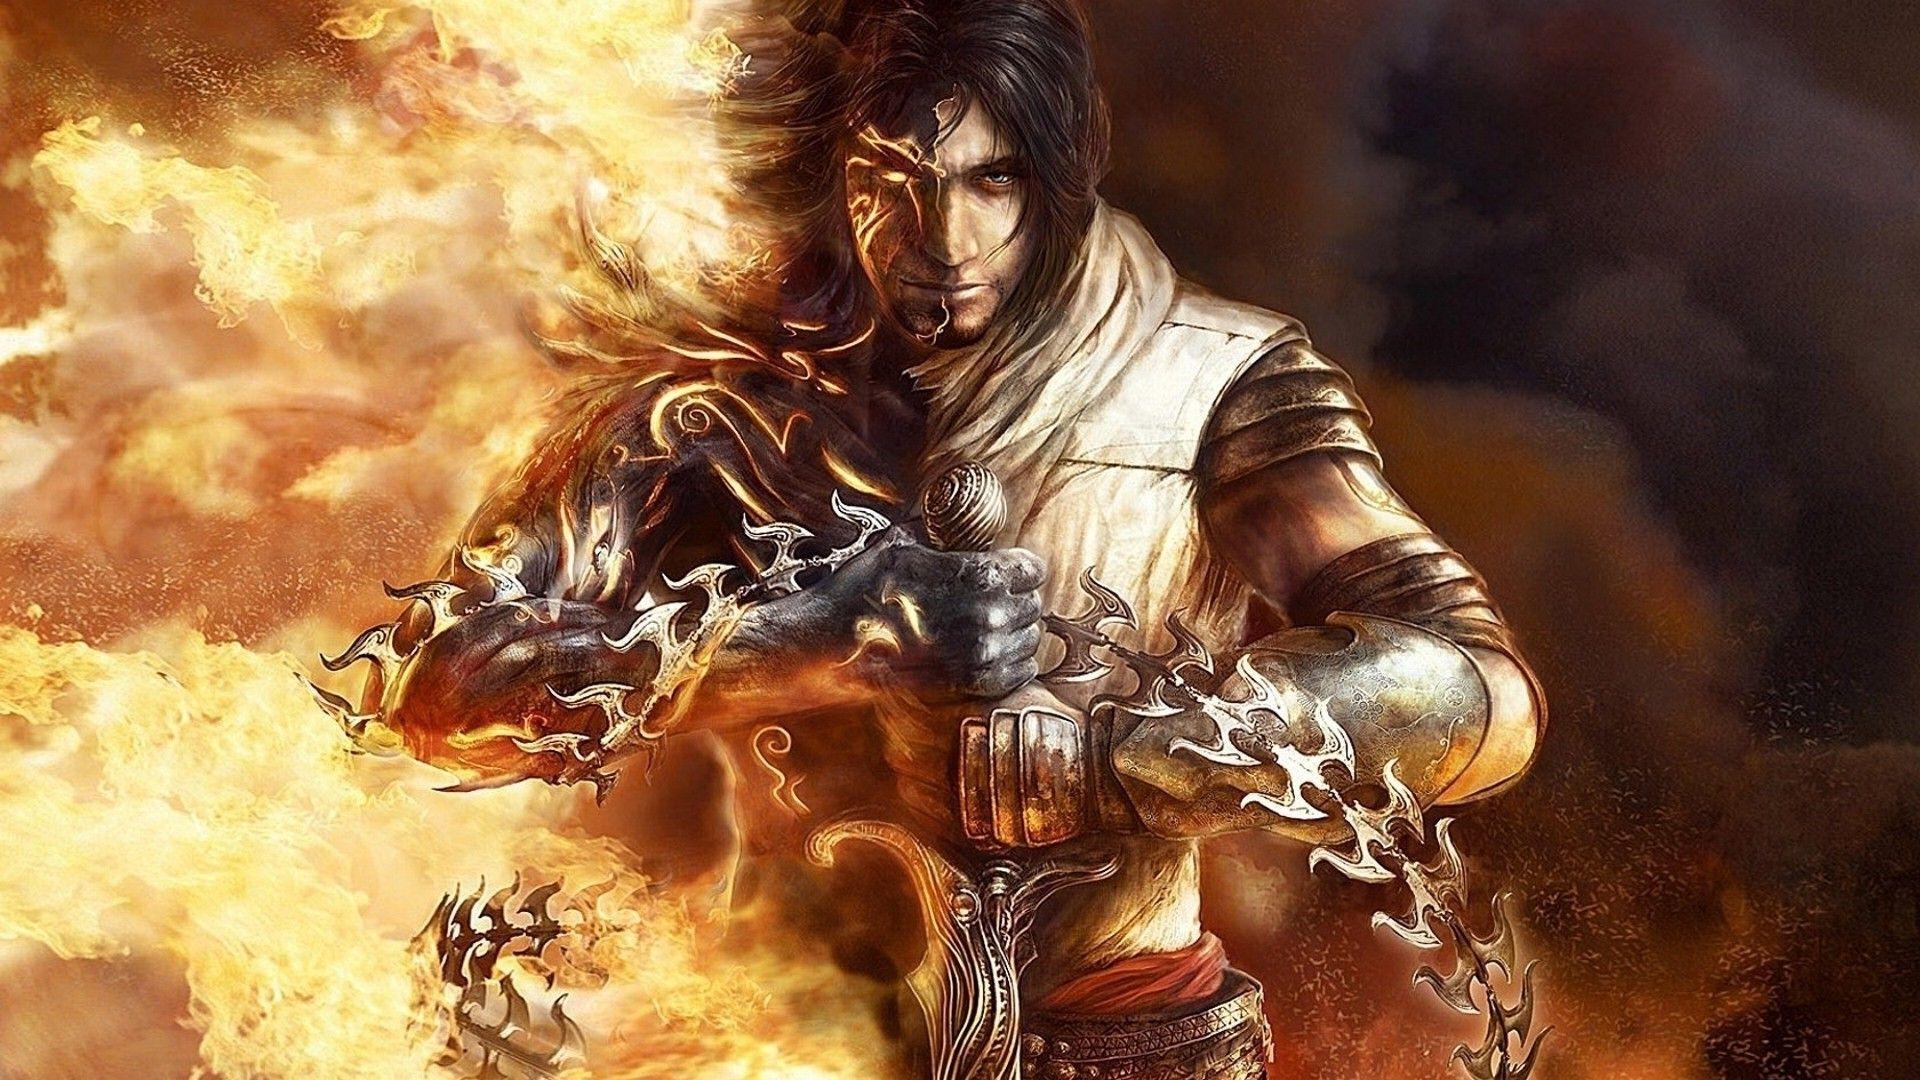 Prince of Persia HD Wallpaper background picture